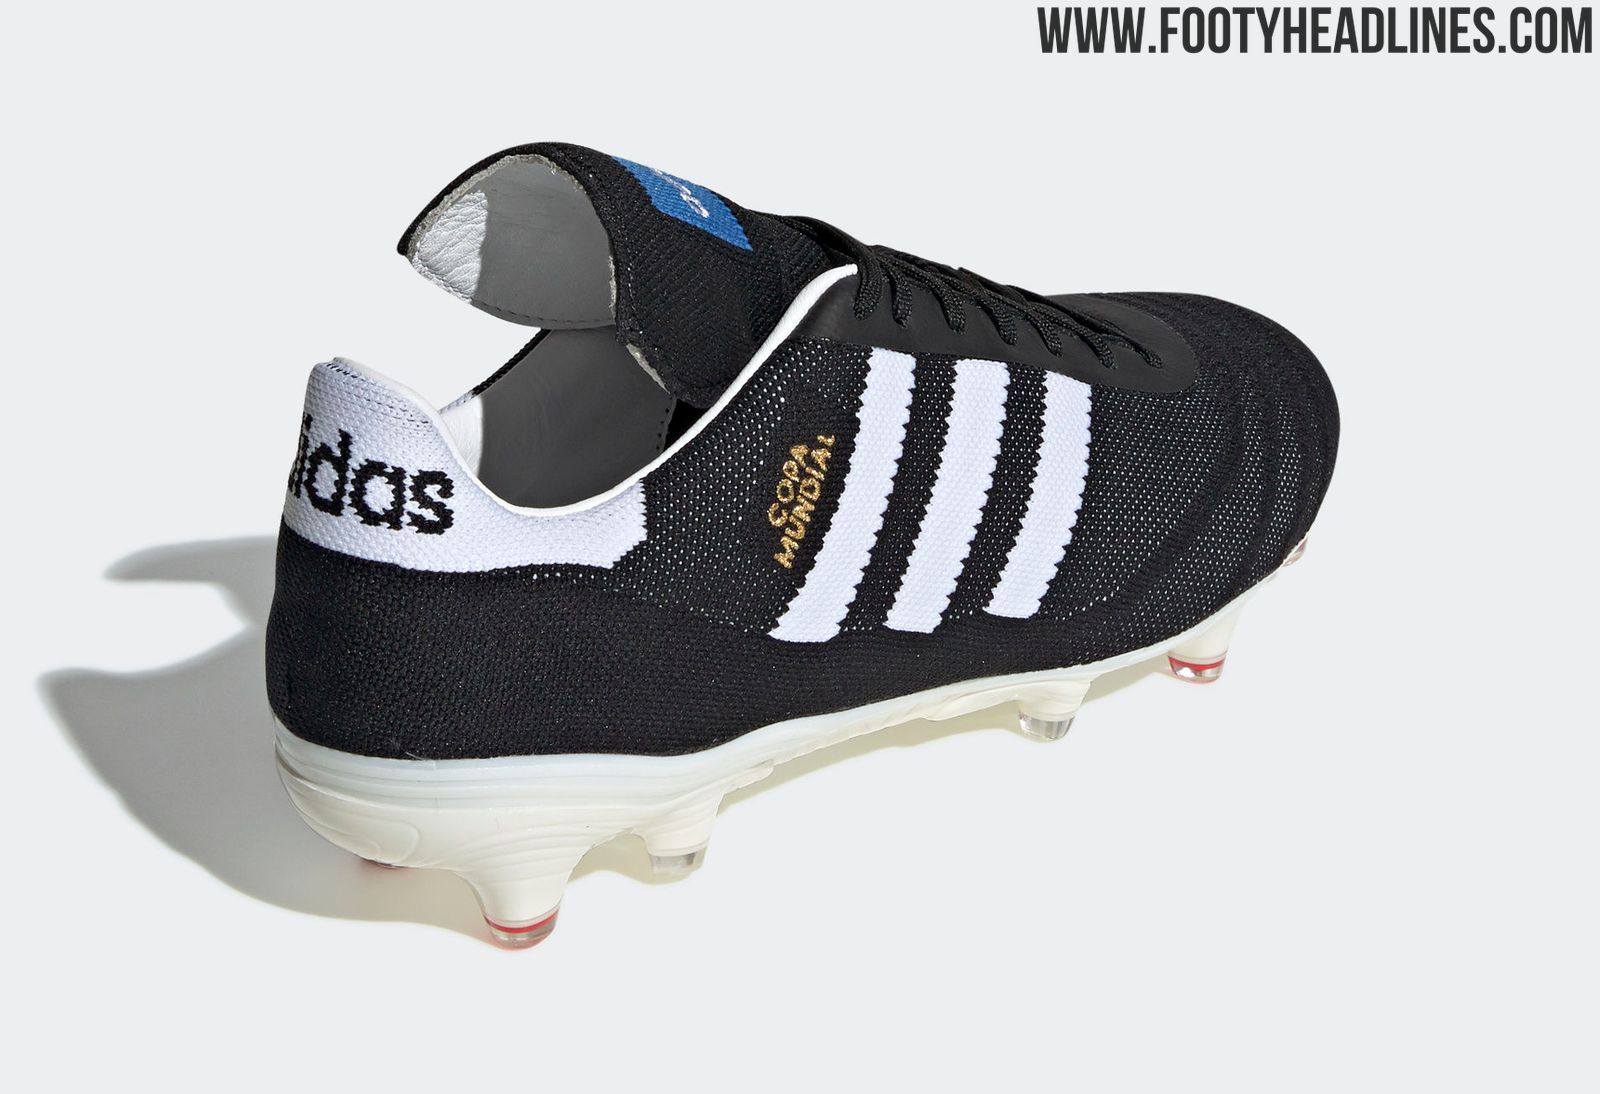 Limited-Edition Copa 70 Primeknit Boots Revealed - Dybala Will Wear Them - Footy Headlines